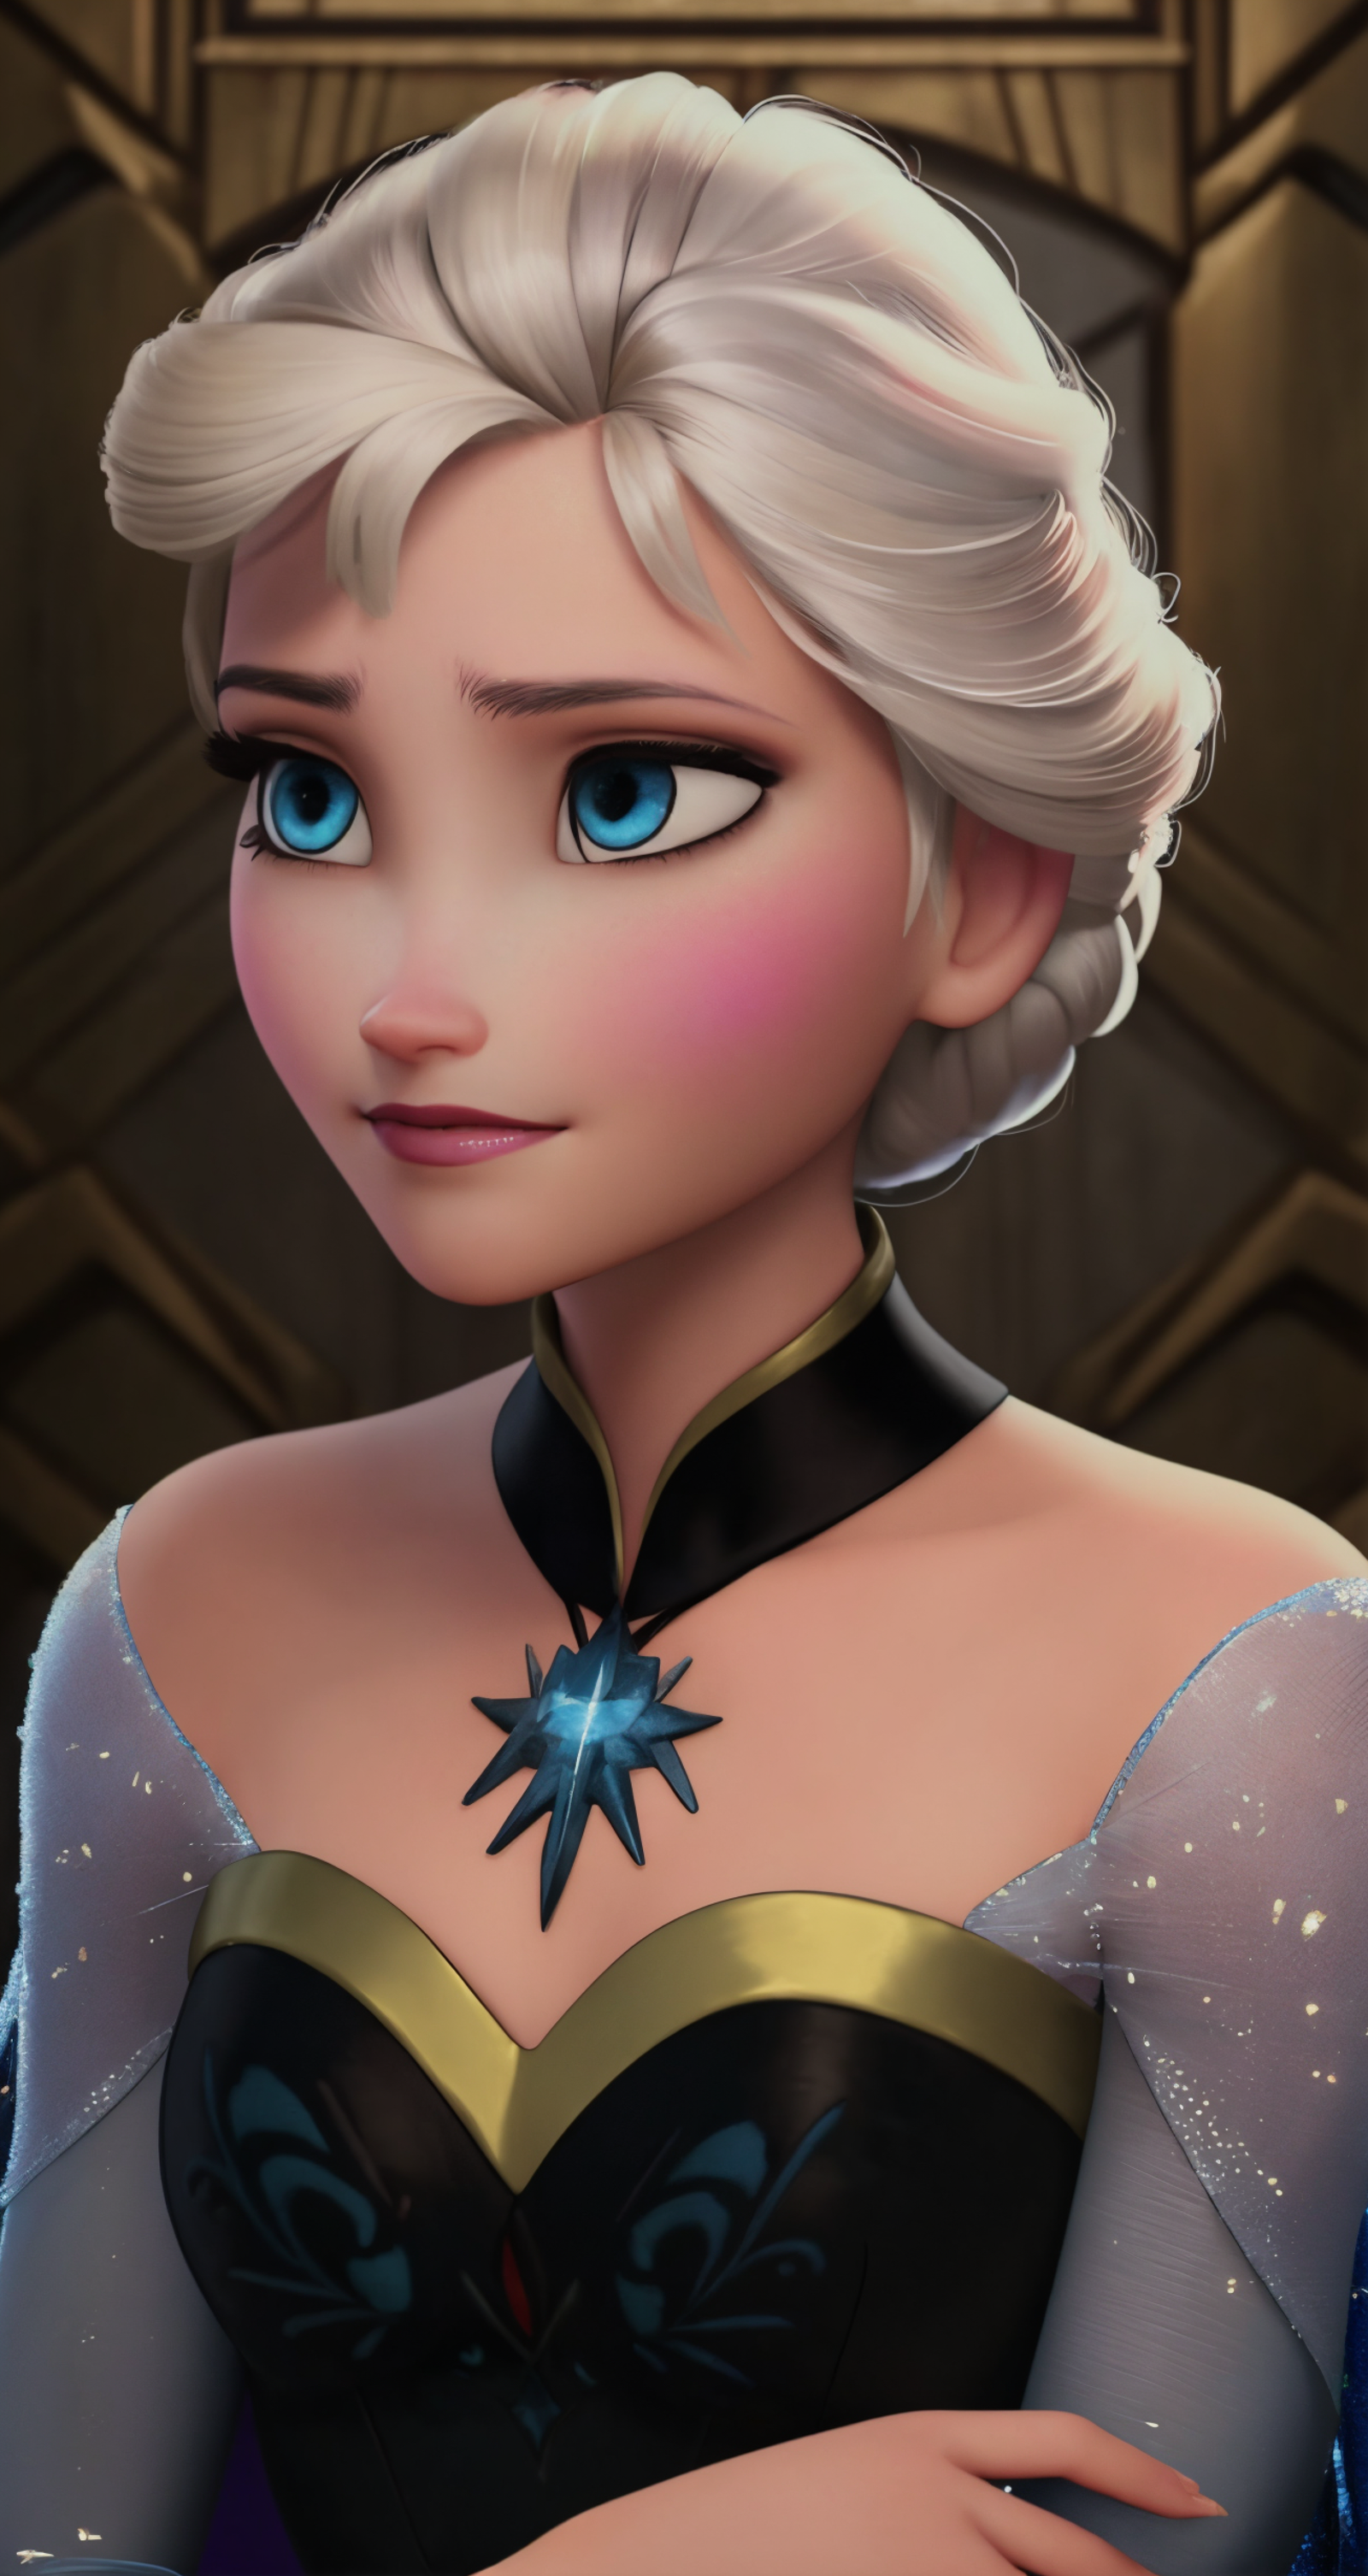 Frozen Animation image by alexds9